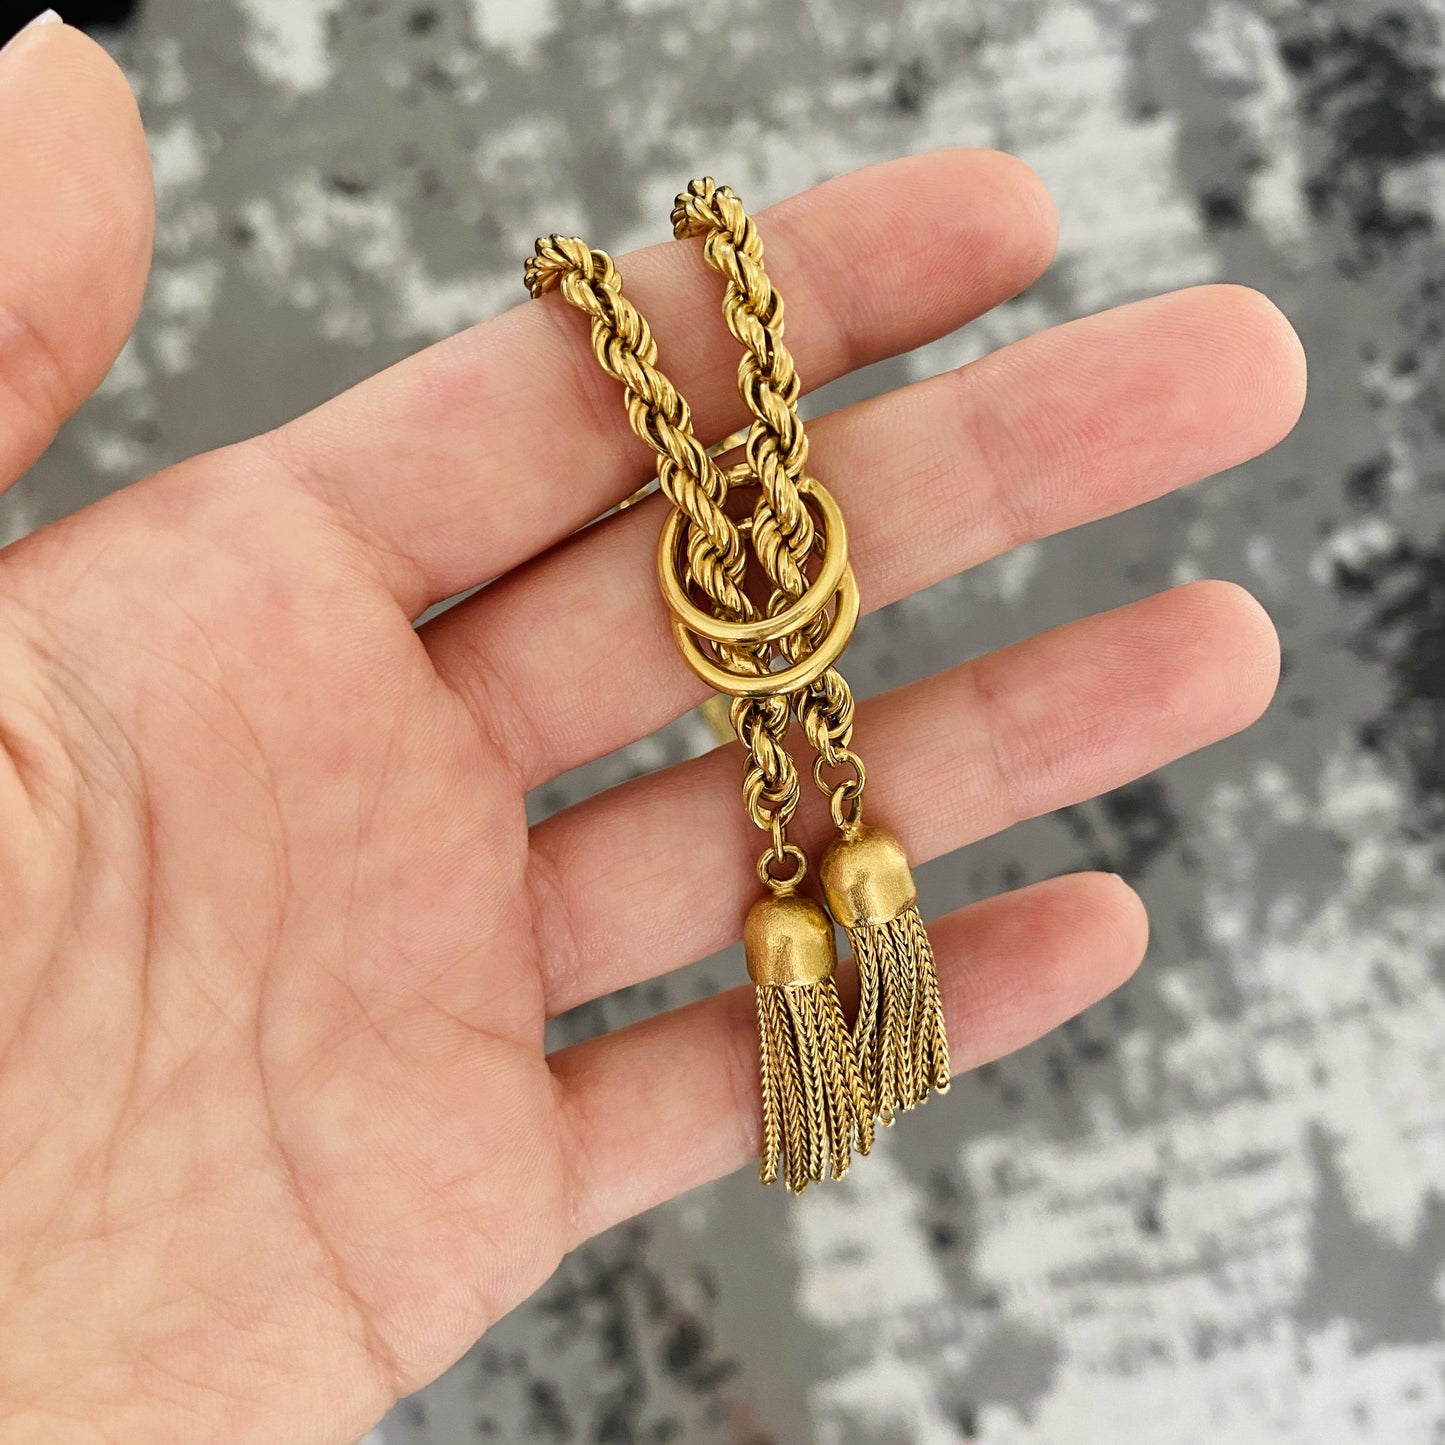 Vintage Rope Necklace With Tassels 31.78G Yellow Gold 18K Italy